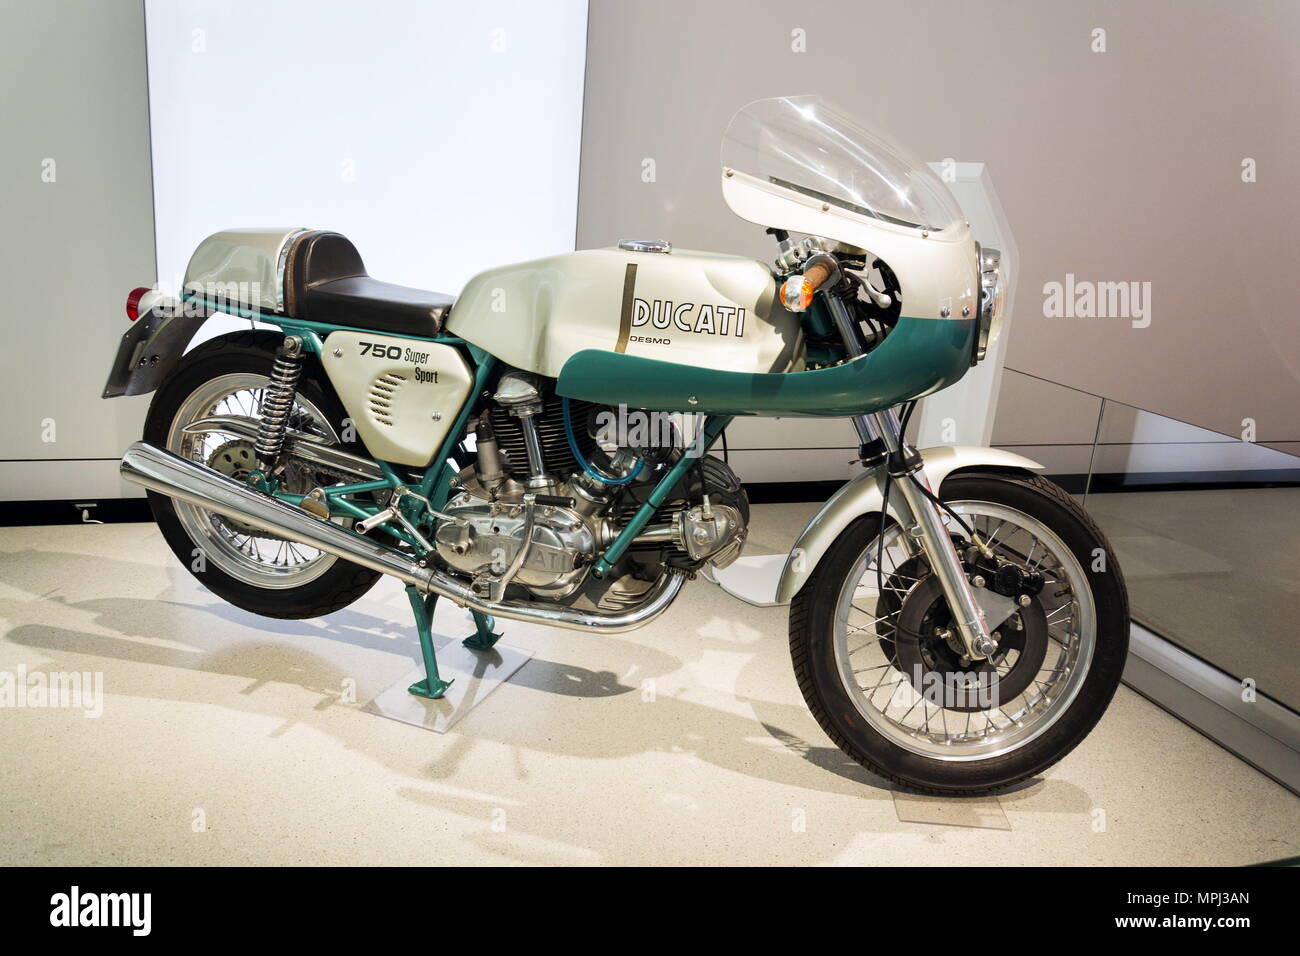 BERLIN, GERMANY - APRIL 15 2018: Ducati 750 Super Sport motorcycle standing  at Volkswagen Group forum Drive on April 15, 2018 in Berlin, Germany Stock  Photo - Alamy